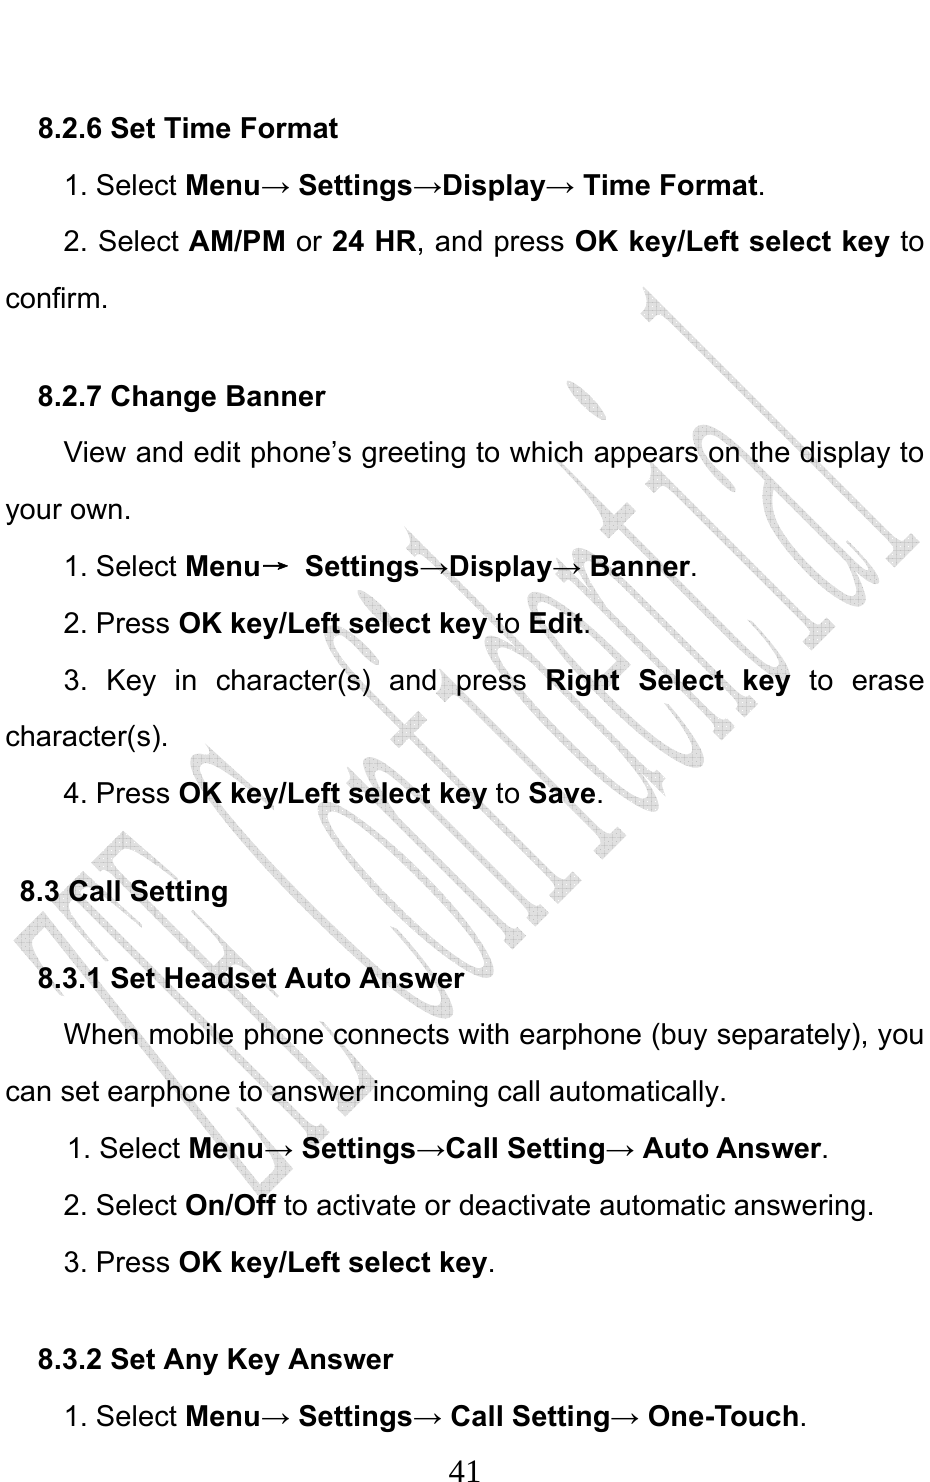                              418.2.6 Set Time Format   1. Select Menu→ Settings→Display→ Time Format. 2. Select AM/PM or 24 HR, and press OK key/Left select key to confirm. 8.2.7 Change Banner     View and edit phone’s greeting to which appears on the display to your own. 1. Select Menu→ Settings→Display→ Banner. 2. Press OK key/Left select key to Edit. 3. Key in character(s) and press Right Select key  to erase character(s). 4. Press OK key/Left select key to Save. 8.3 Call Setting 8.3.1 Set Headset Auto Answer When mobile phone connects with earphone (buy separately), you can set earphone to answer incoming call automatically. 1. Select Menu→ Settings→Call Setting→ Auto Answer. 2. Select On/Off to activate or deactivate automatic answering. 3. Press OK key/Left select key. 8.3.2 Set Any Key Answer 1. Select Menu→ Settings→ Call Setting→ One-Touch. 